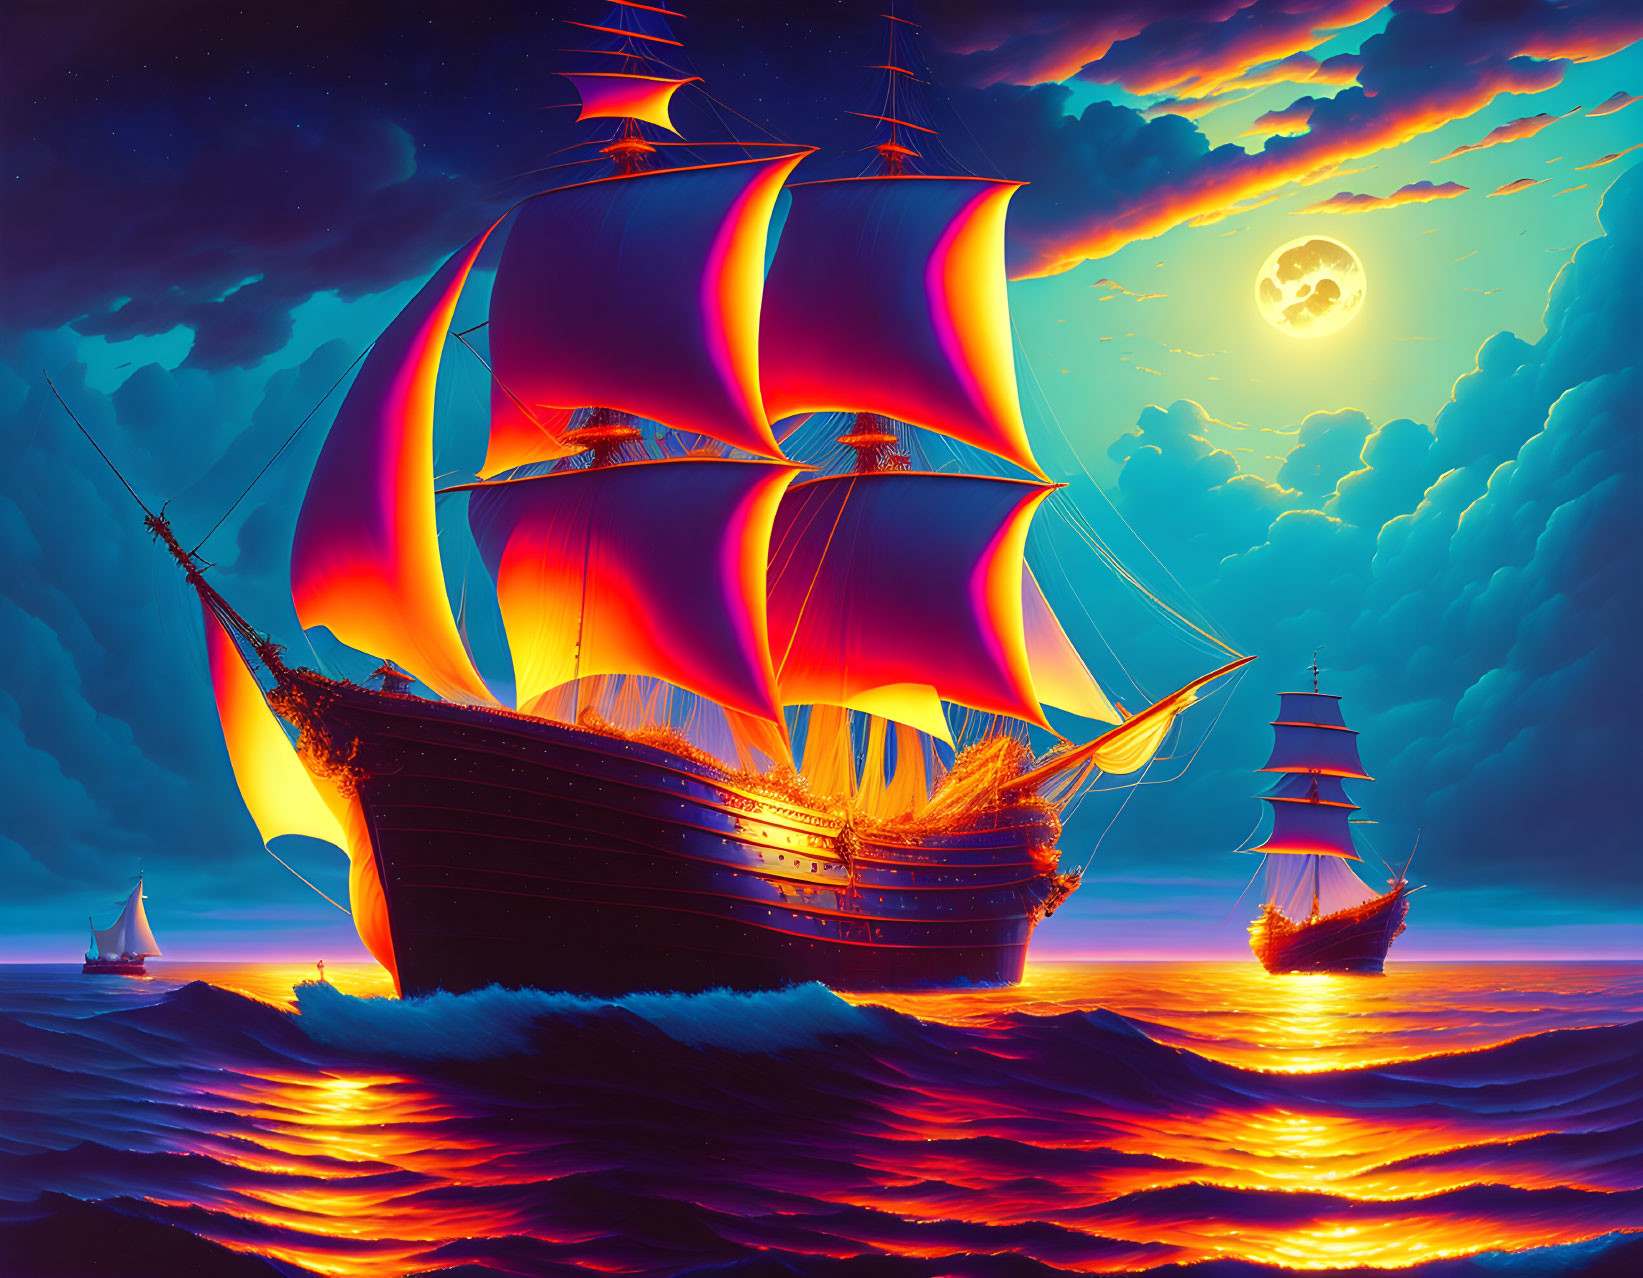 Moonlit sea scene featuring sailing ships with red sails